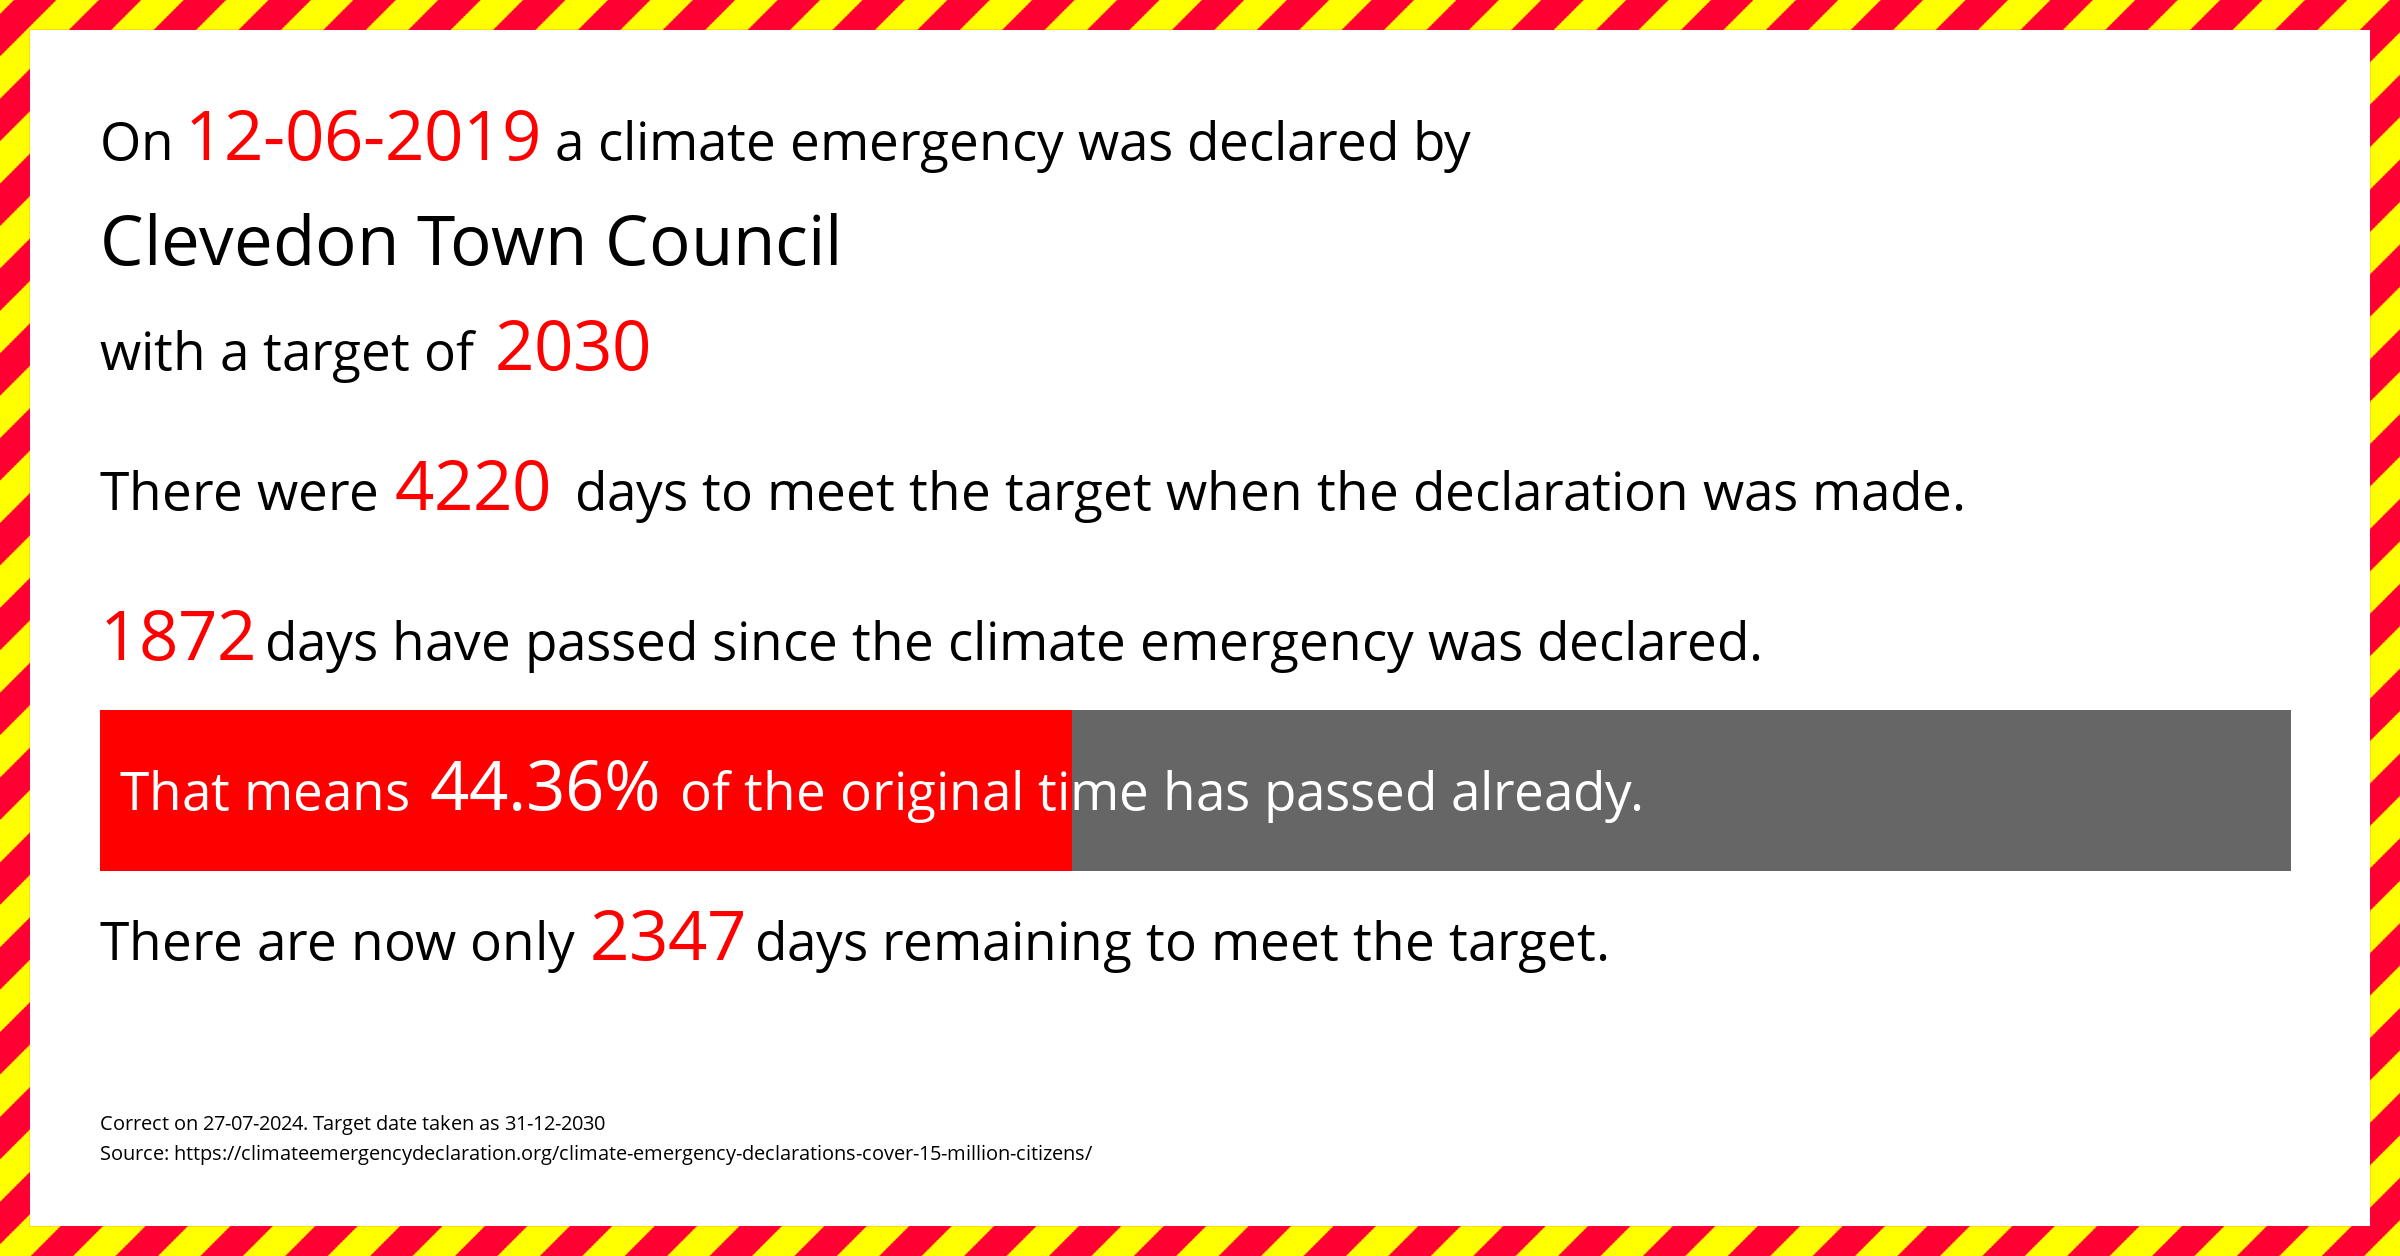 Clevedon Town Council declared a Climate emergency on Wednesday 12th June 2019, with a target of 2030.